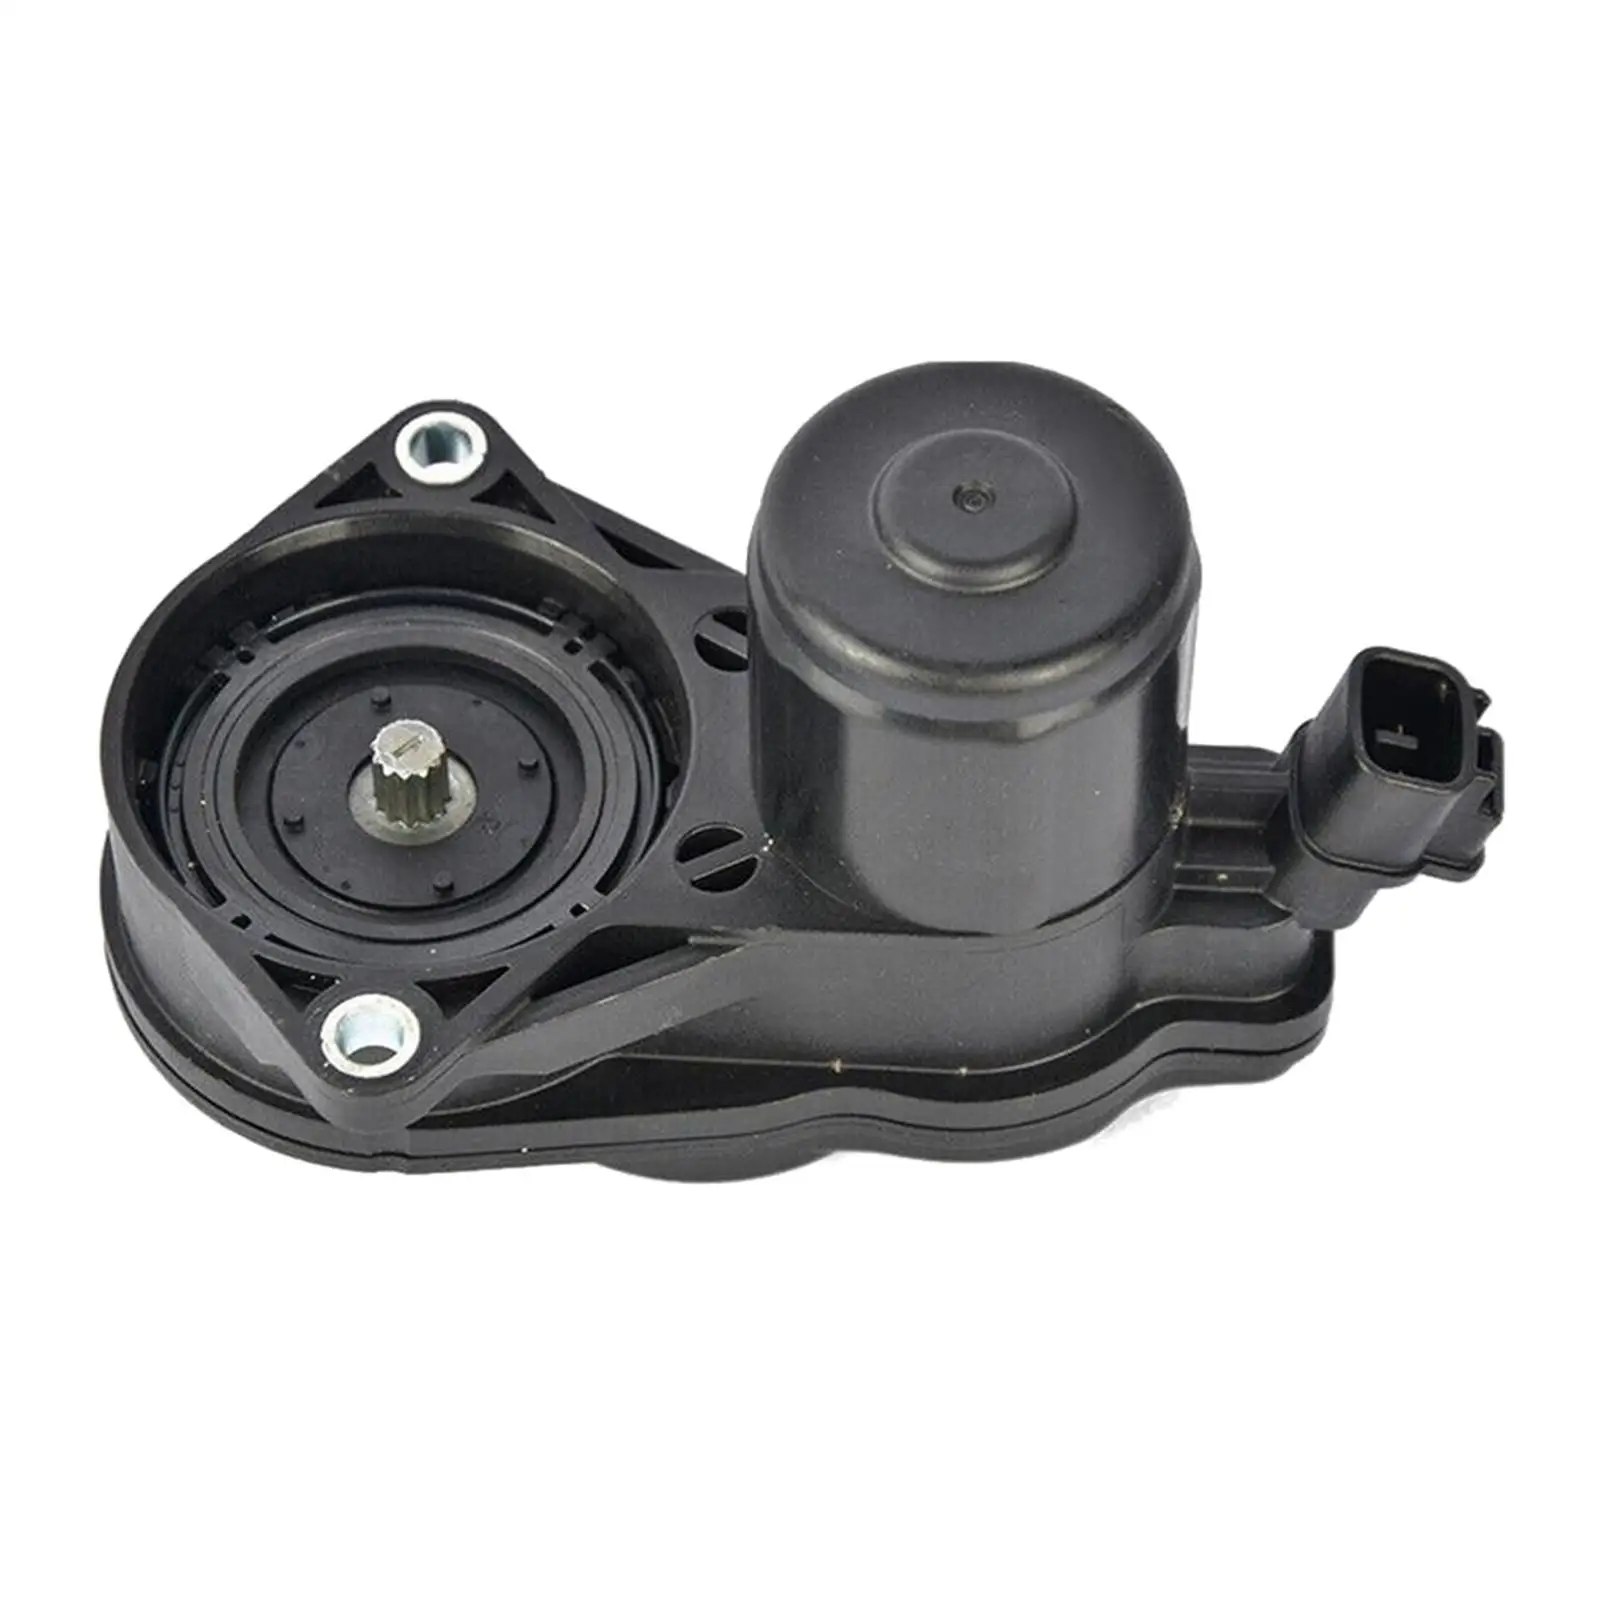 Parking Brake Actuator Replacement Automotive Replacement Part for Toyota for highlander Venza Corolla Hatchback